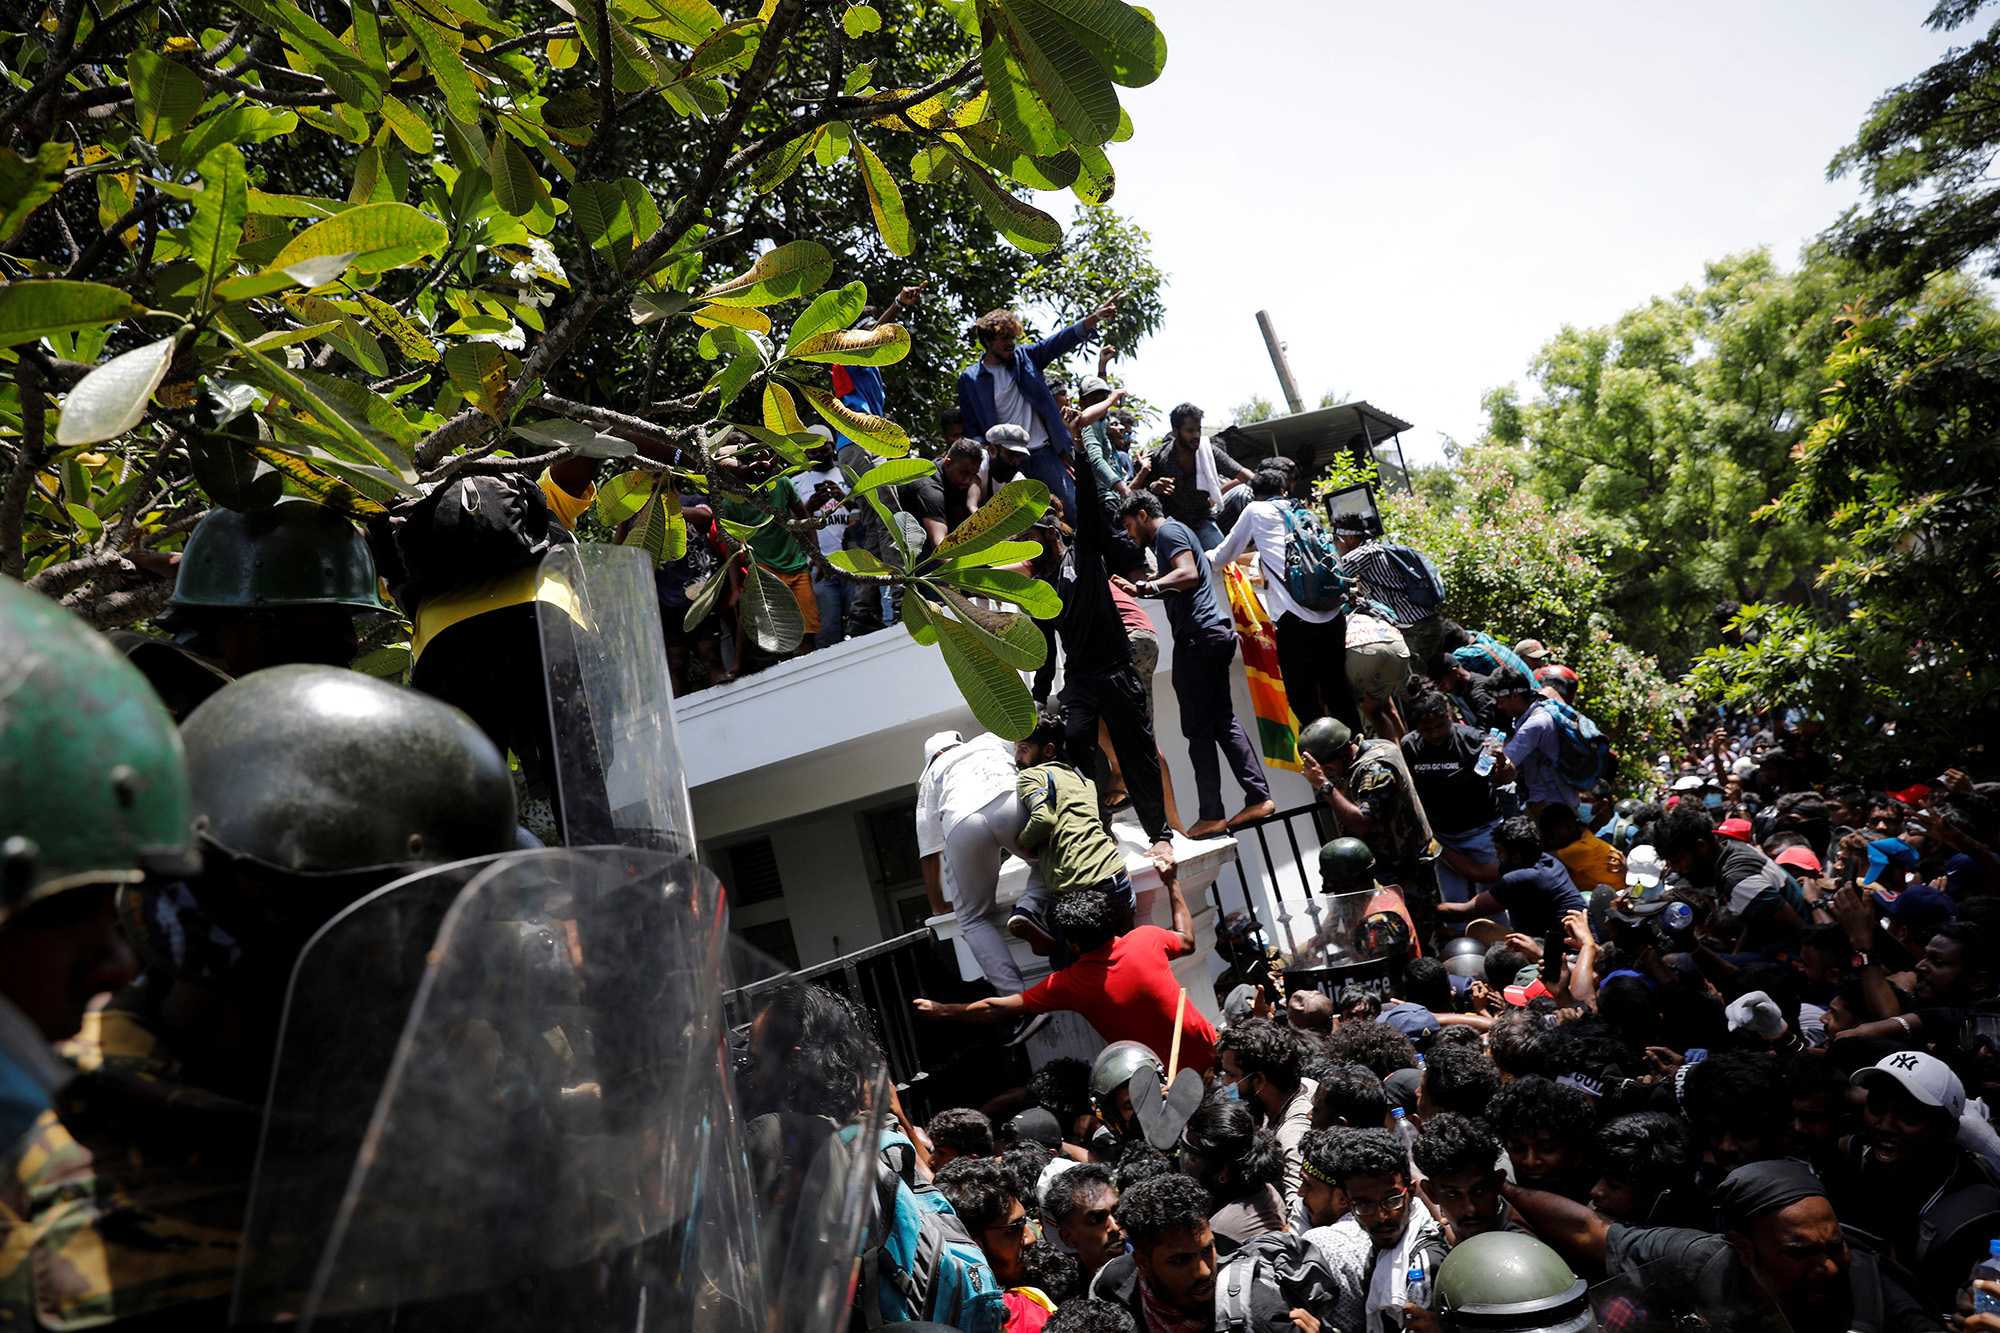 Protestors climb the front gate of Sri Lanka's Prime Minister Ranil Wickremesinghe's office during a protest in Colombo, Sri Lanka, on July 13.